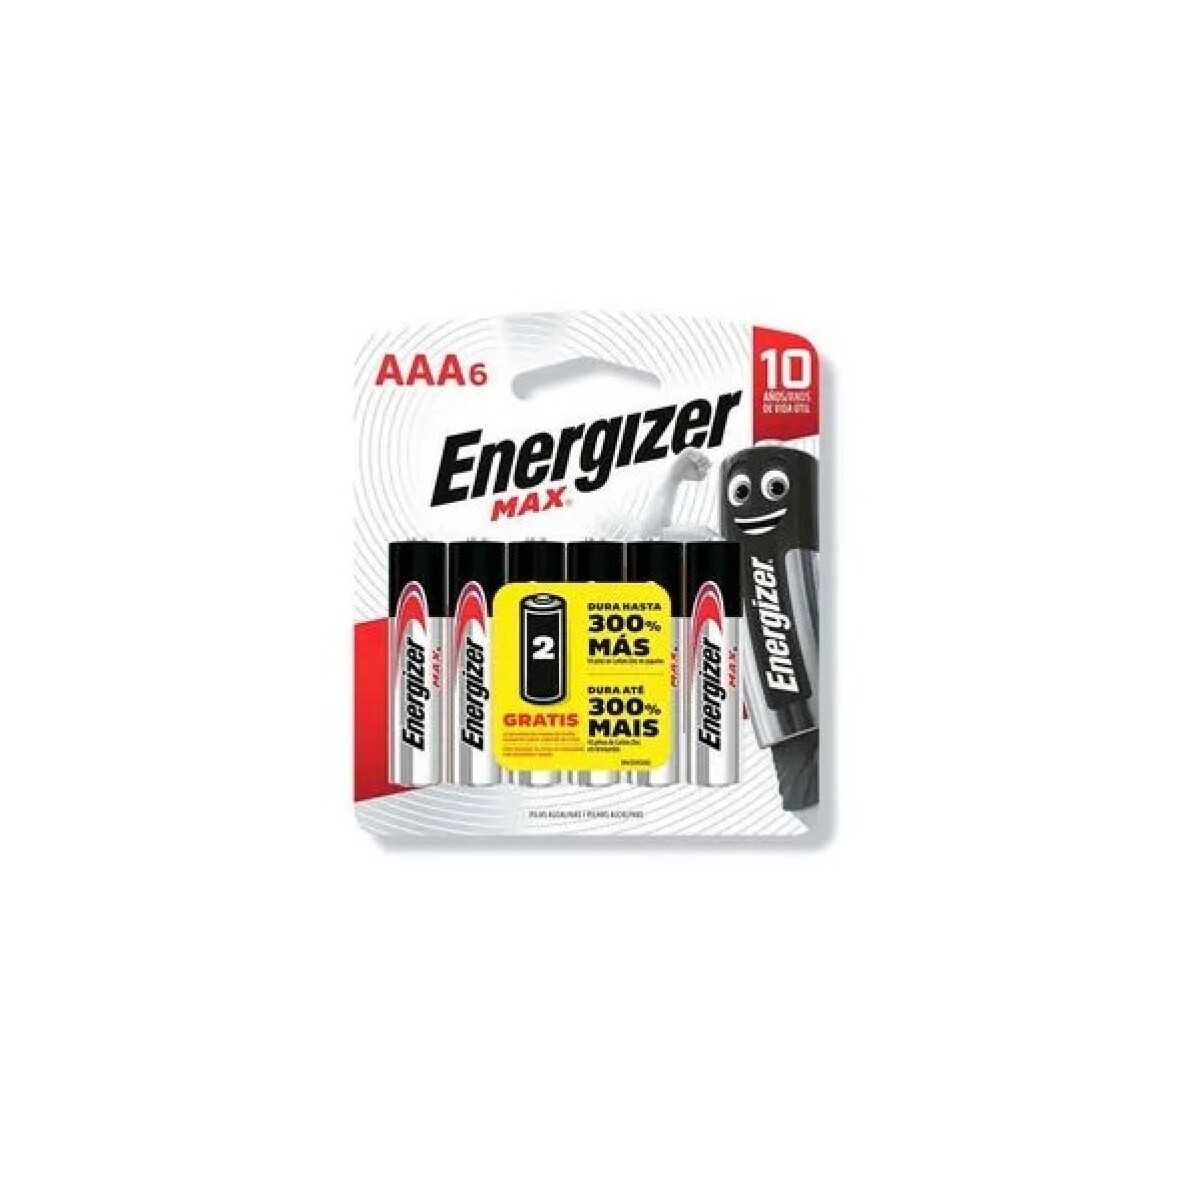 Pilas Energizer Max Aaa 6 Uds. 